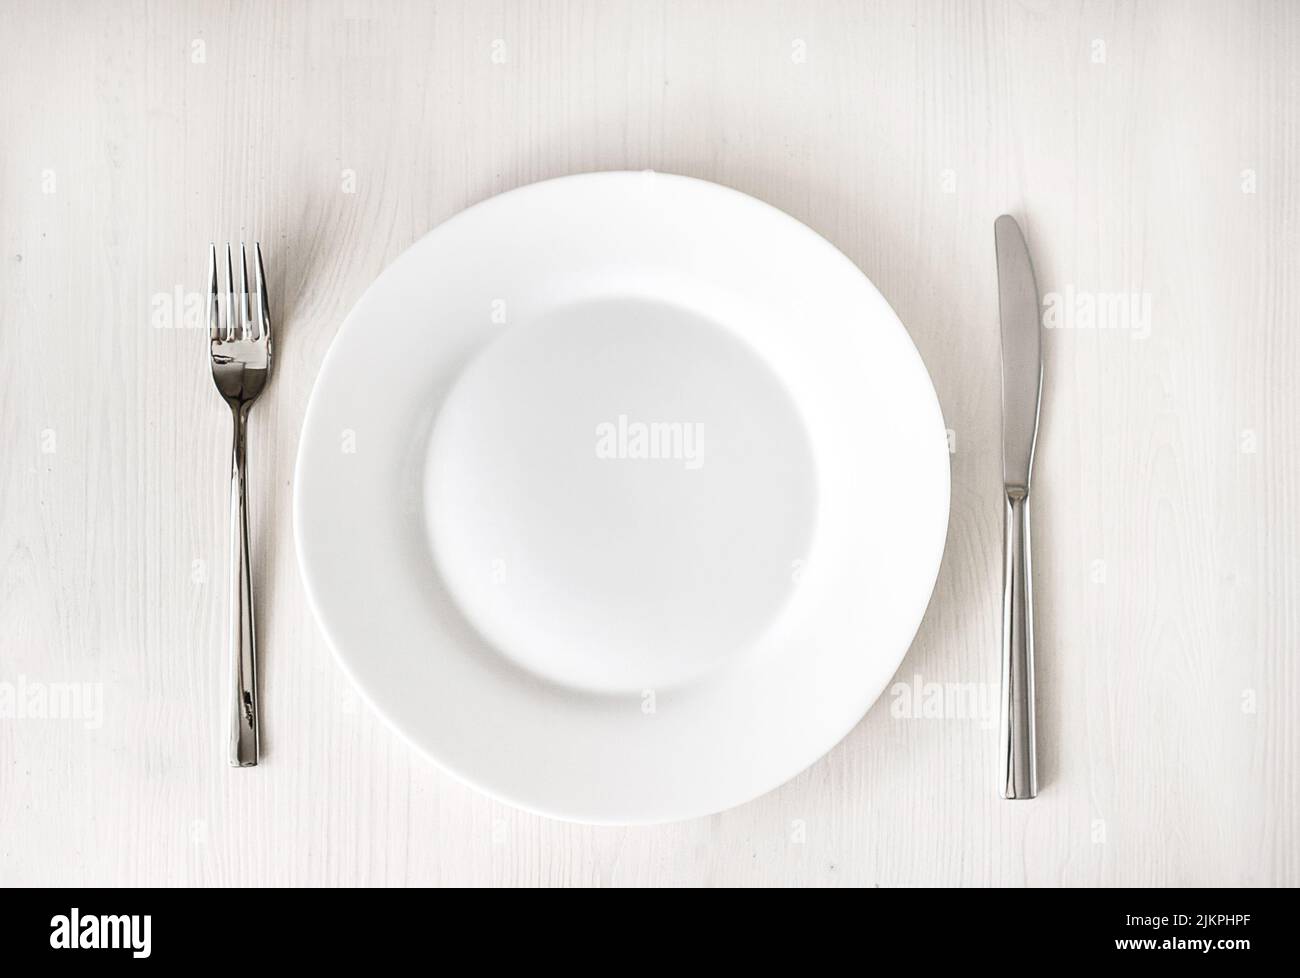 White clean plate and stainless knife and fork on light wooden table. Served cutlery. Top view Stock Photo